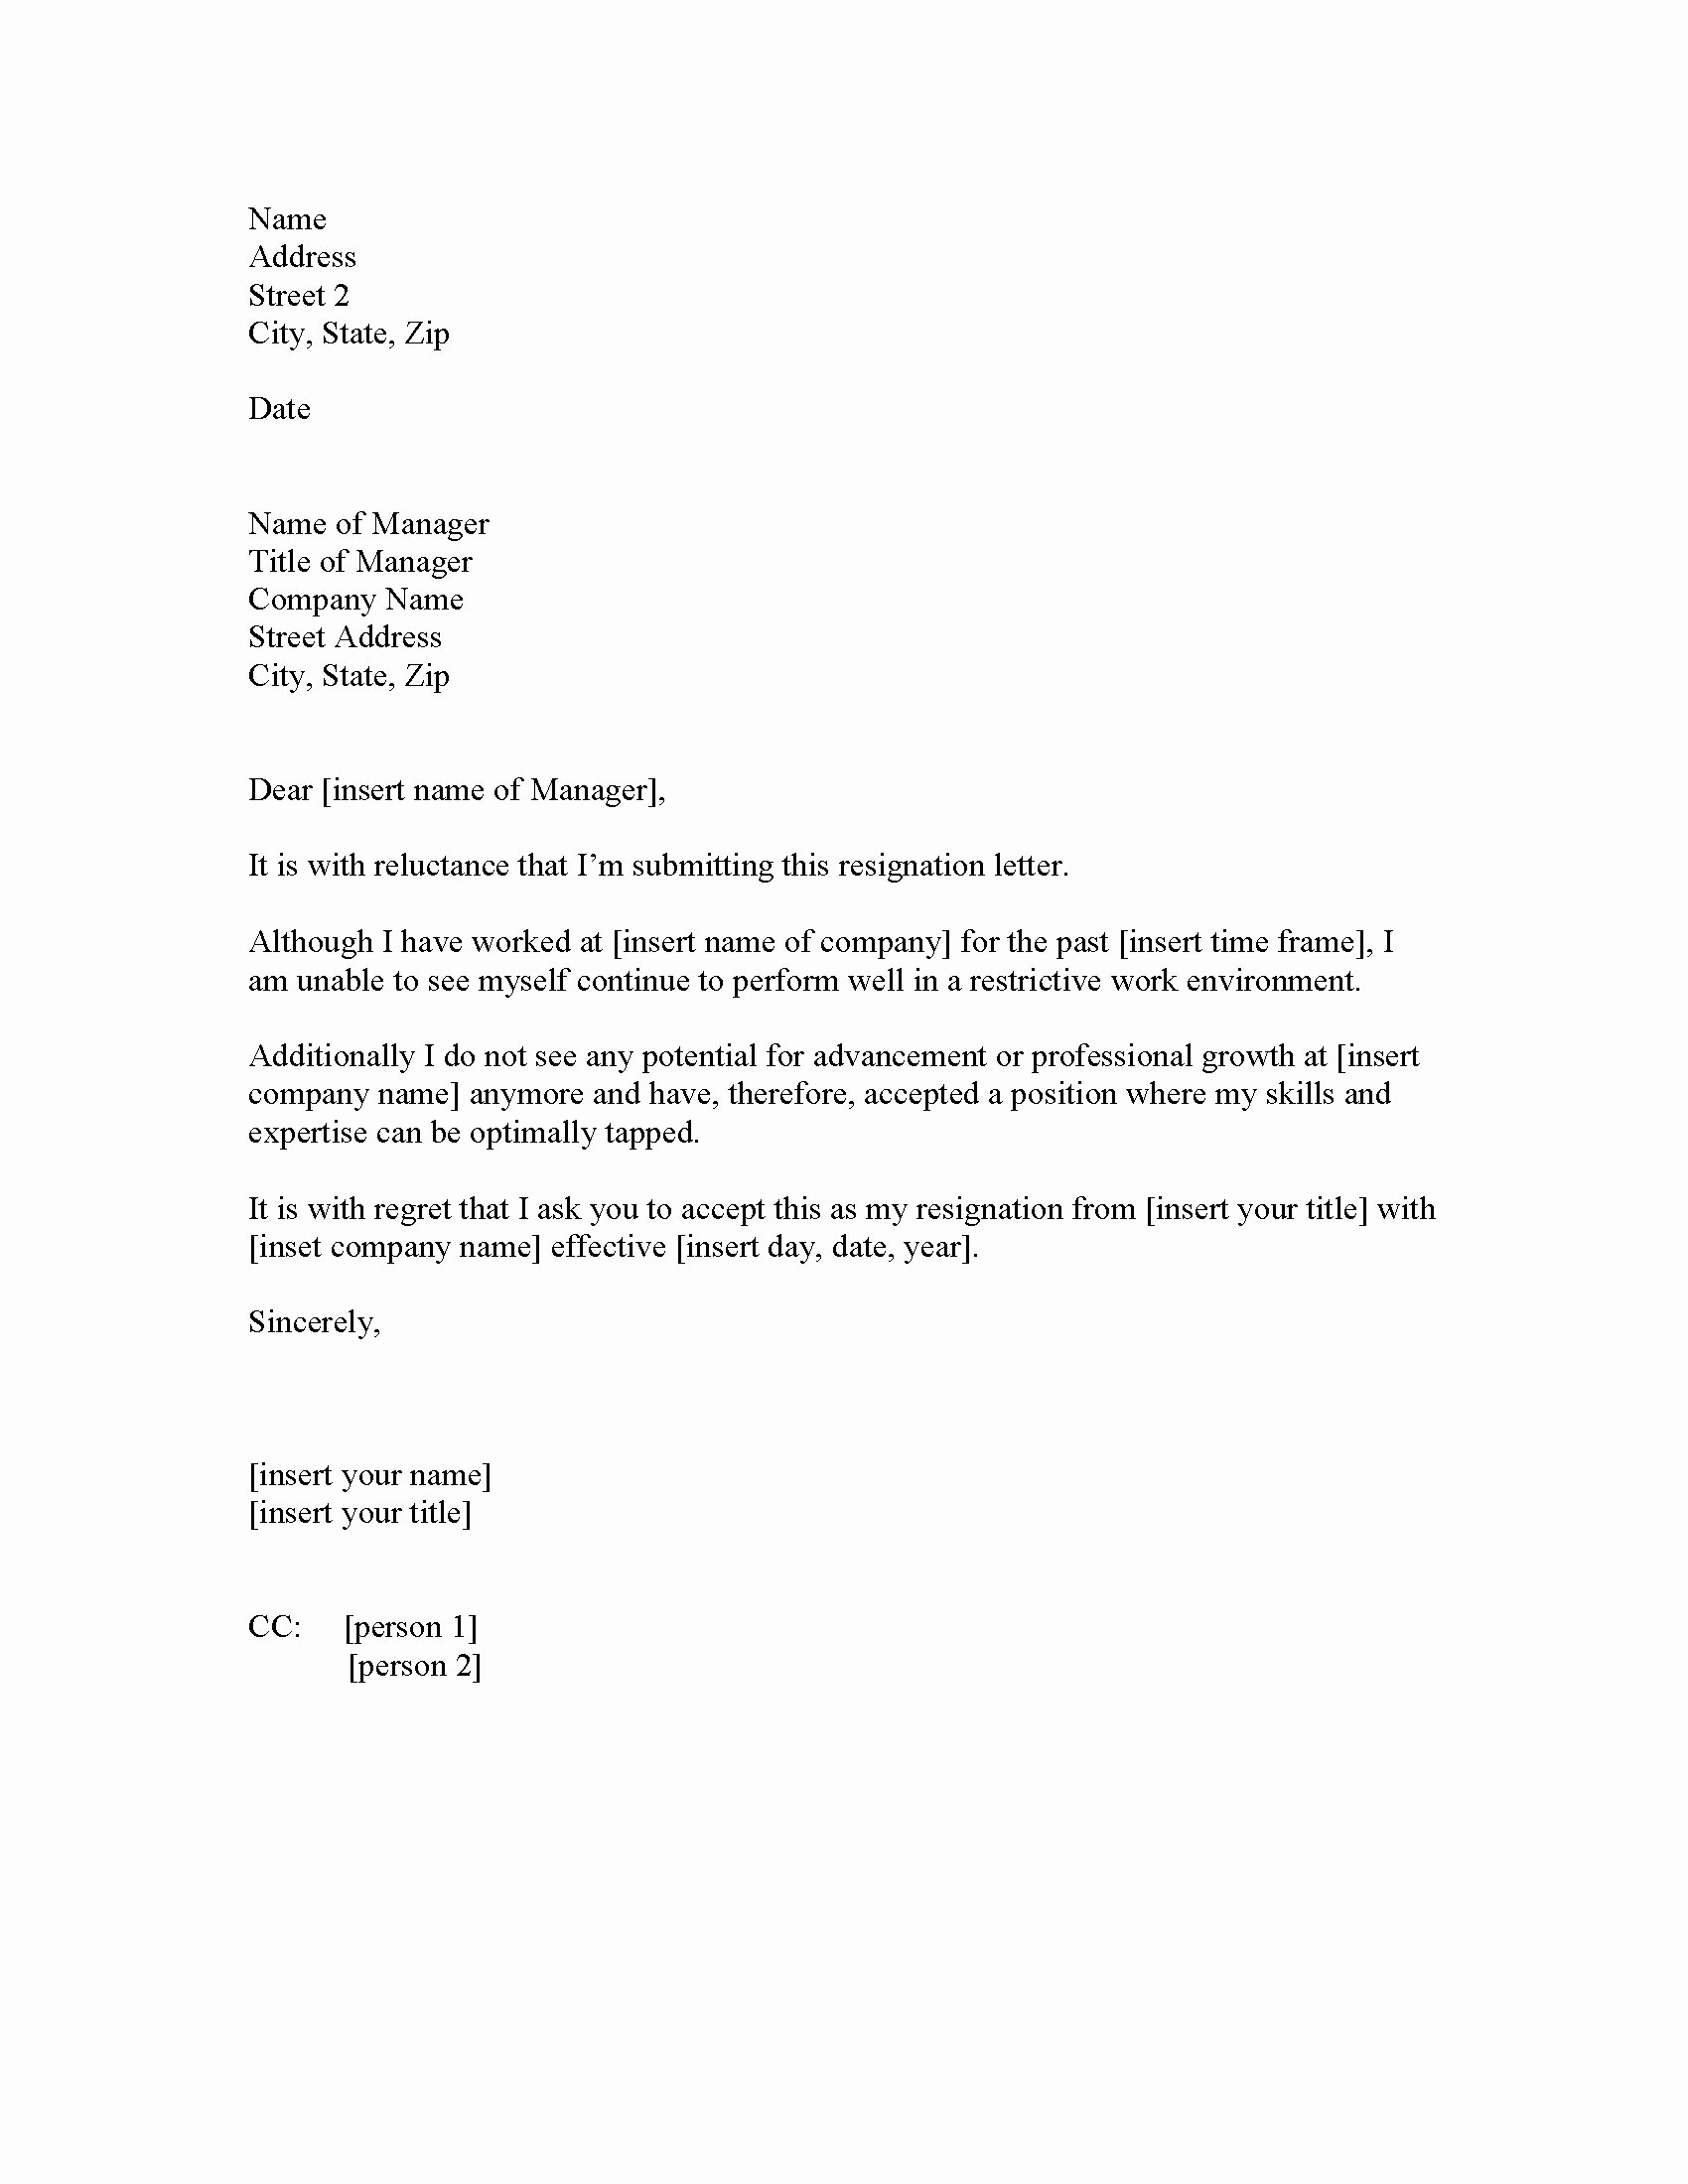 Resignation Letter Samples Inspirational Dos and Don Ts for A Resignation Letter